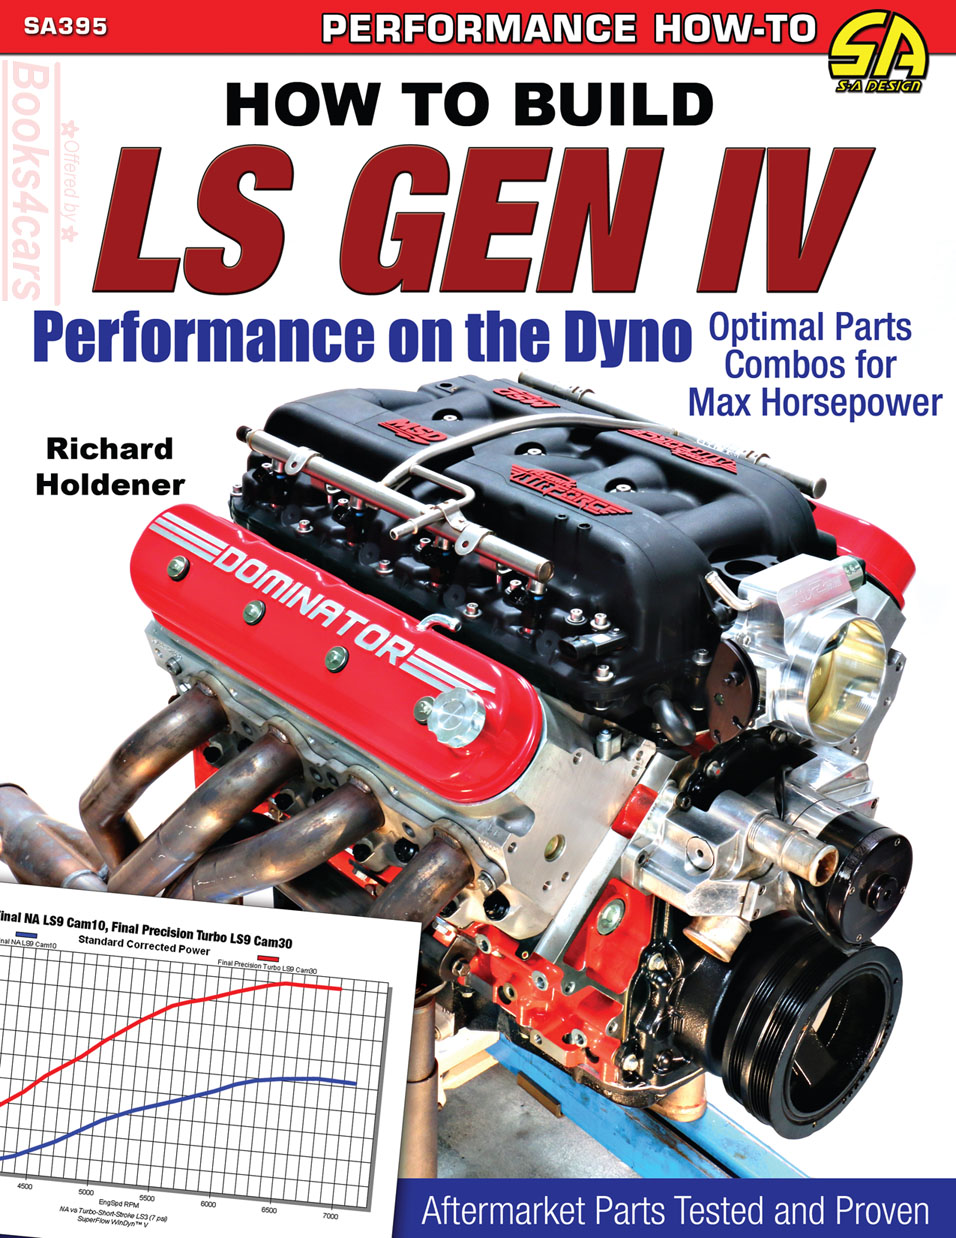 How to Build LS GEN IV Performance on the Dyno Optimal Parts for Max Horsepower by R. Holdener 144 pgs with over 260 color photos